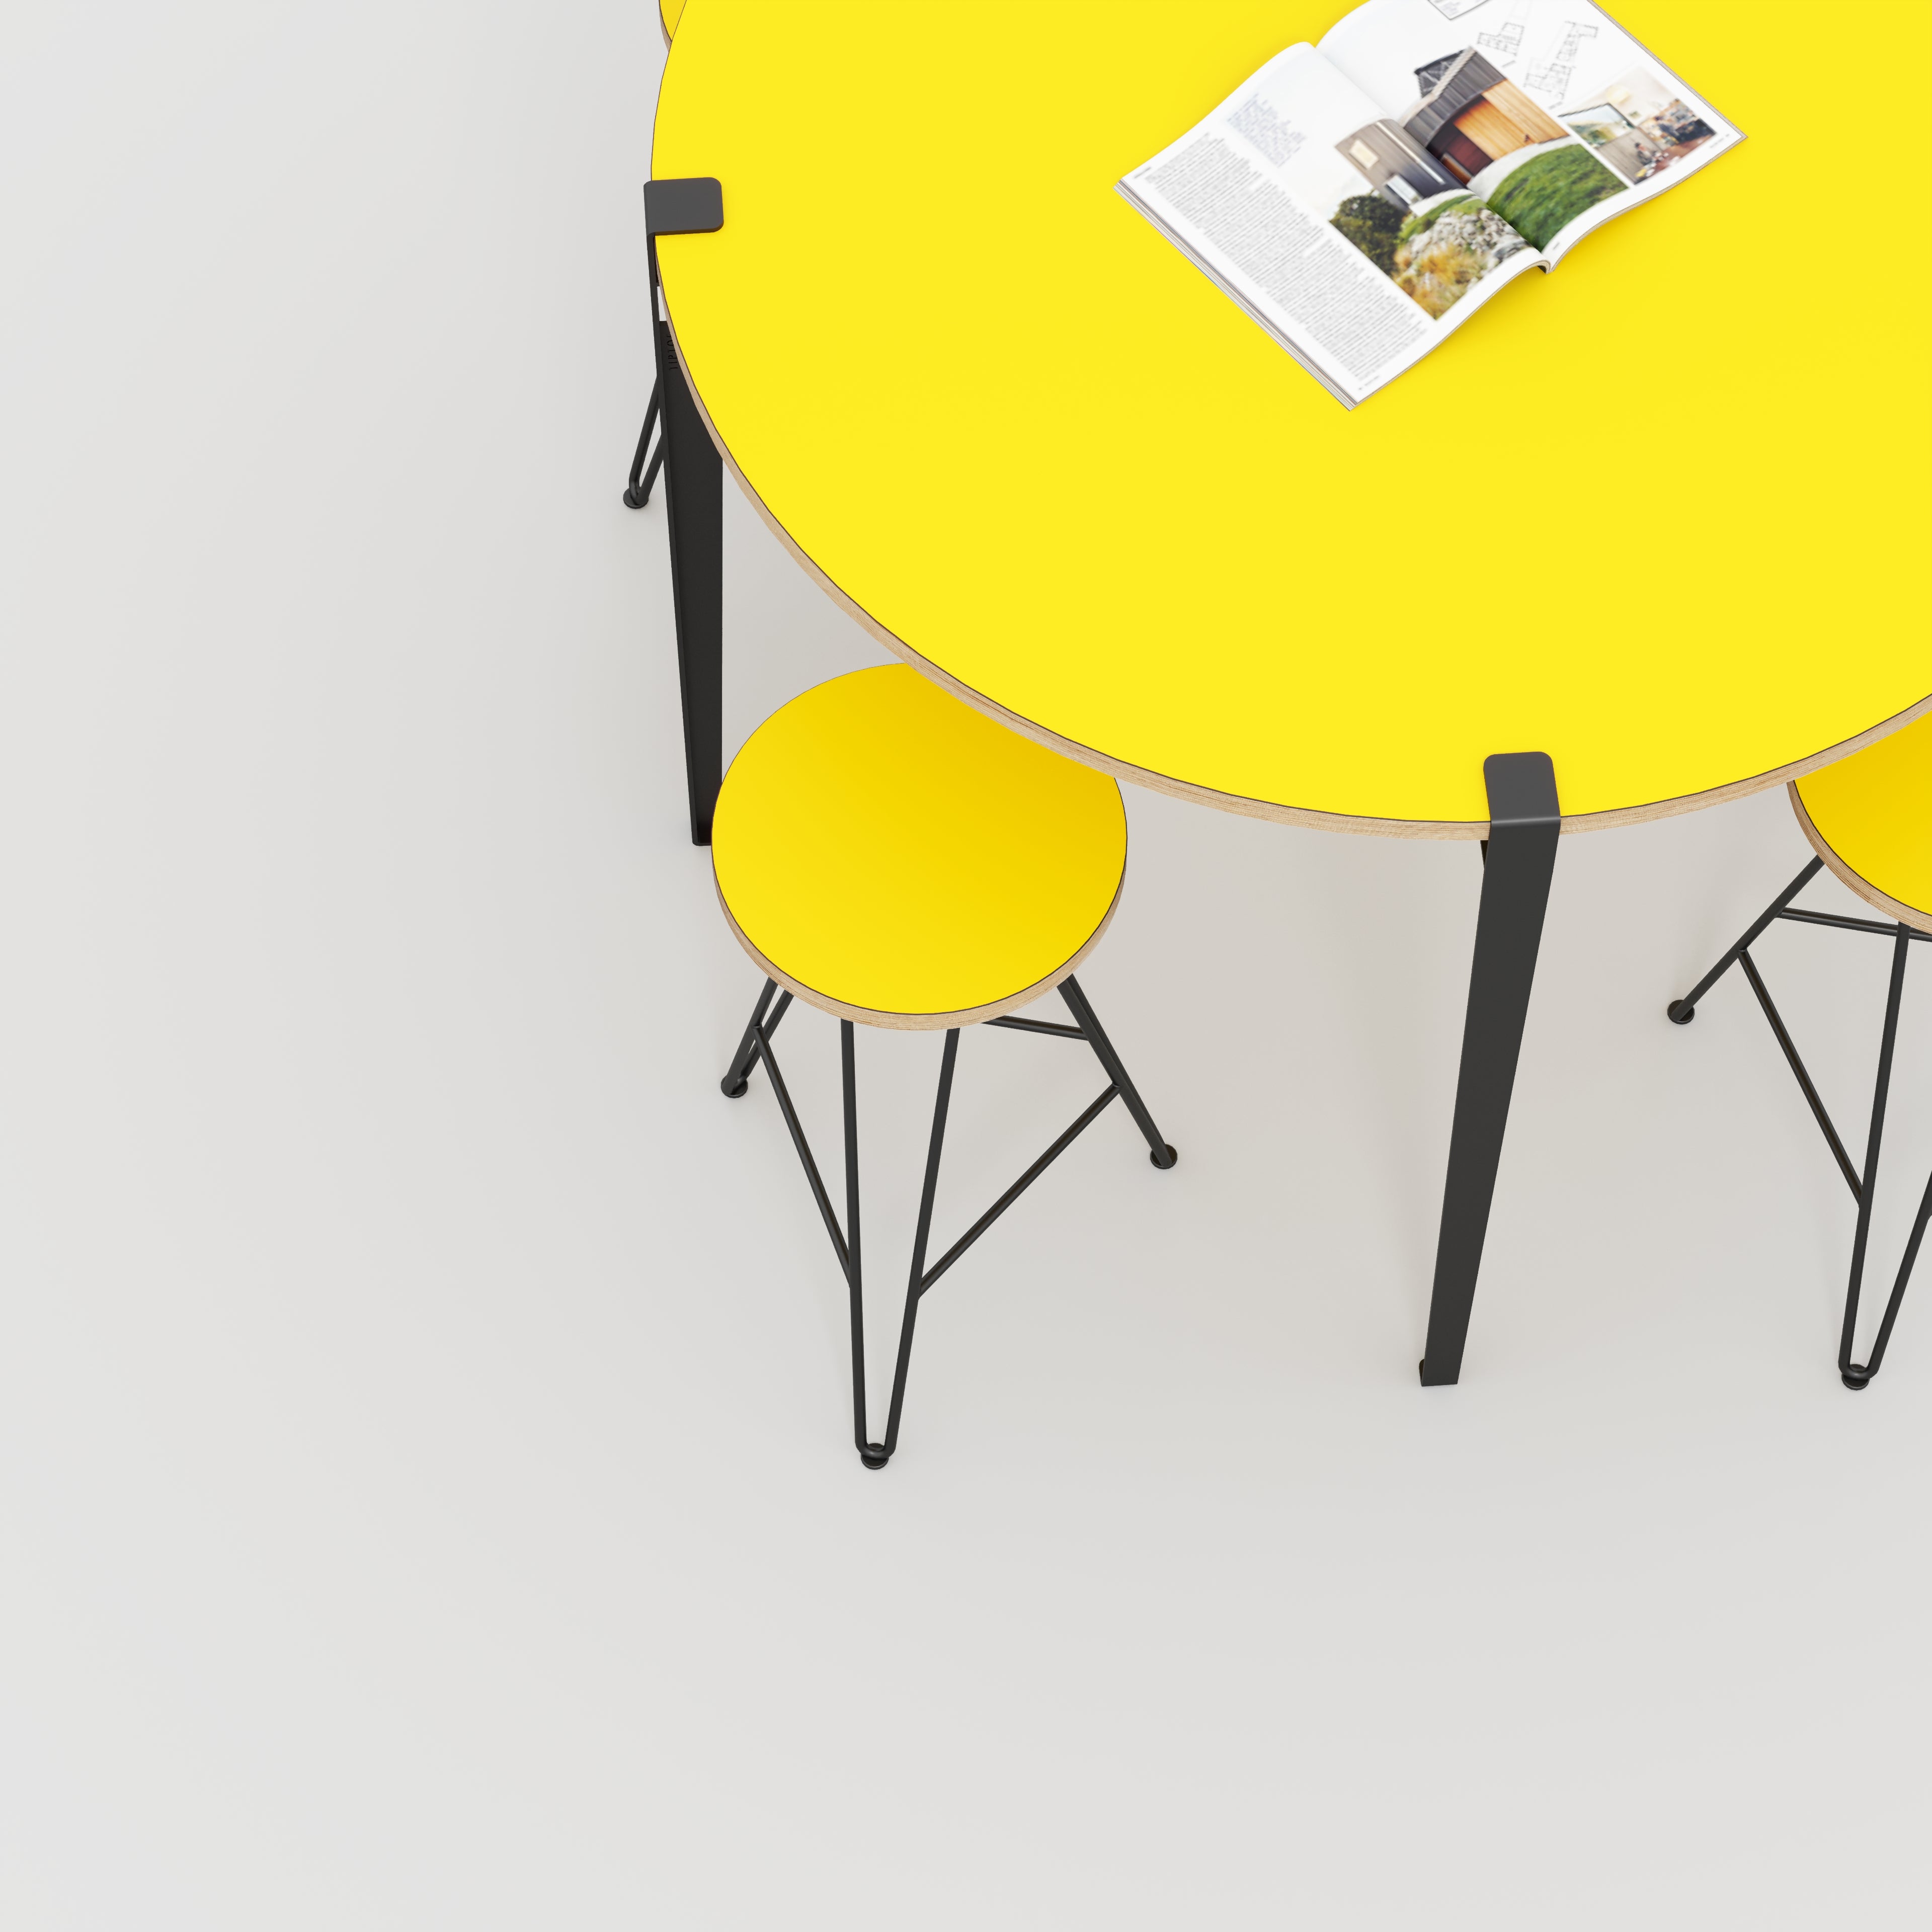 Round Table with Black Tiptoe Legs - Formica Chrome Yellow - 1200(dia) x 900(h)